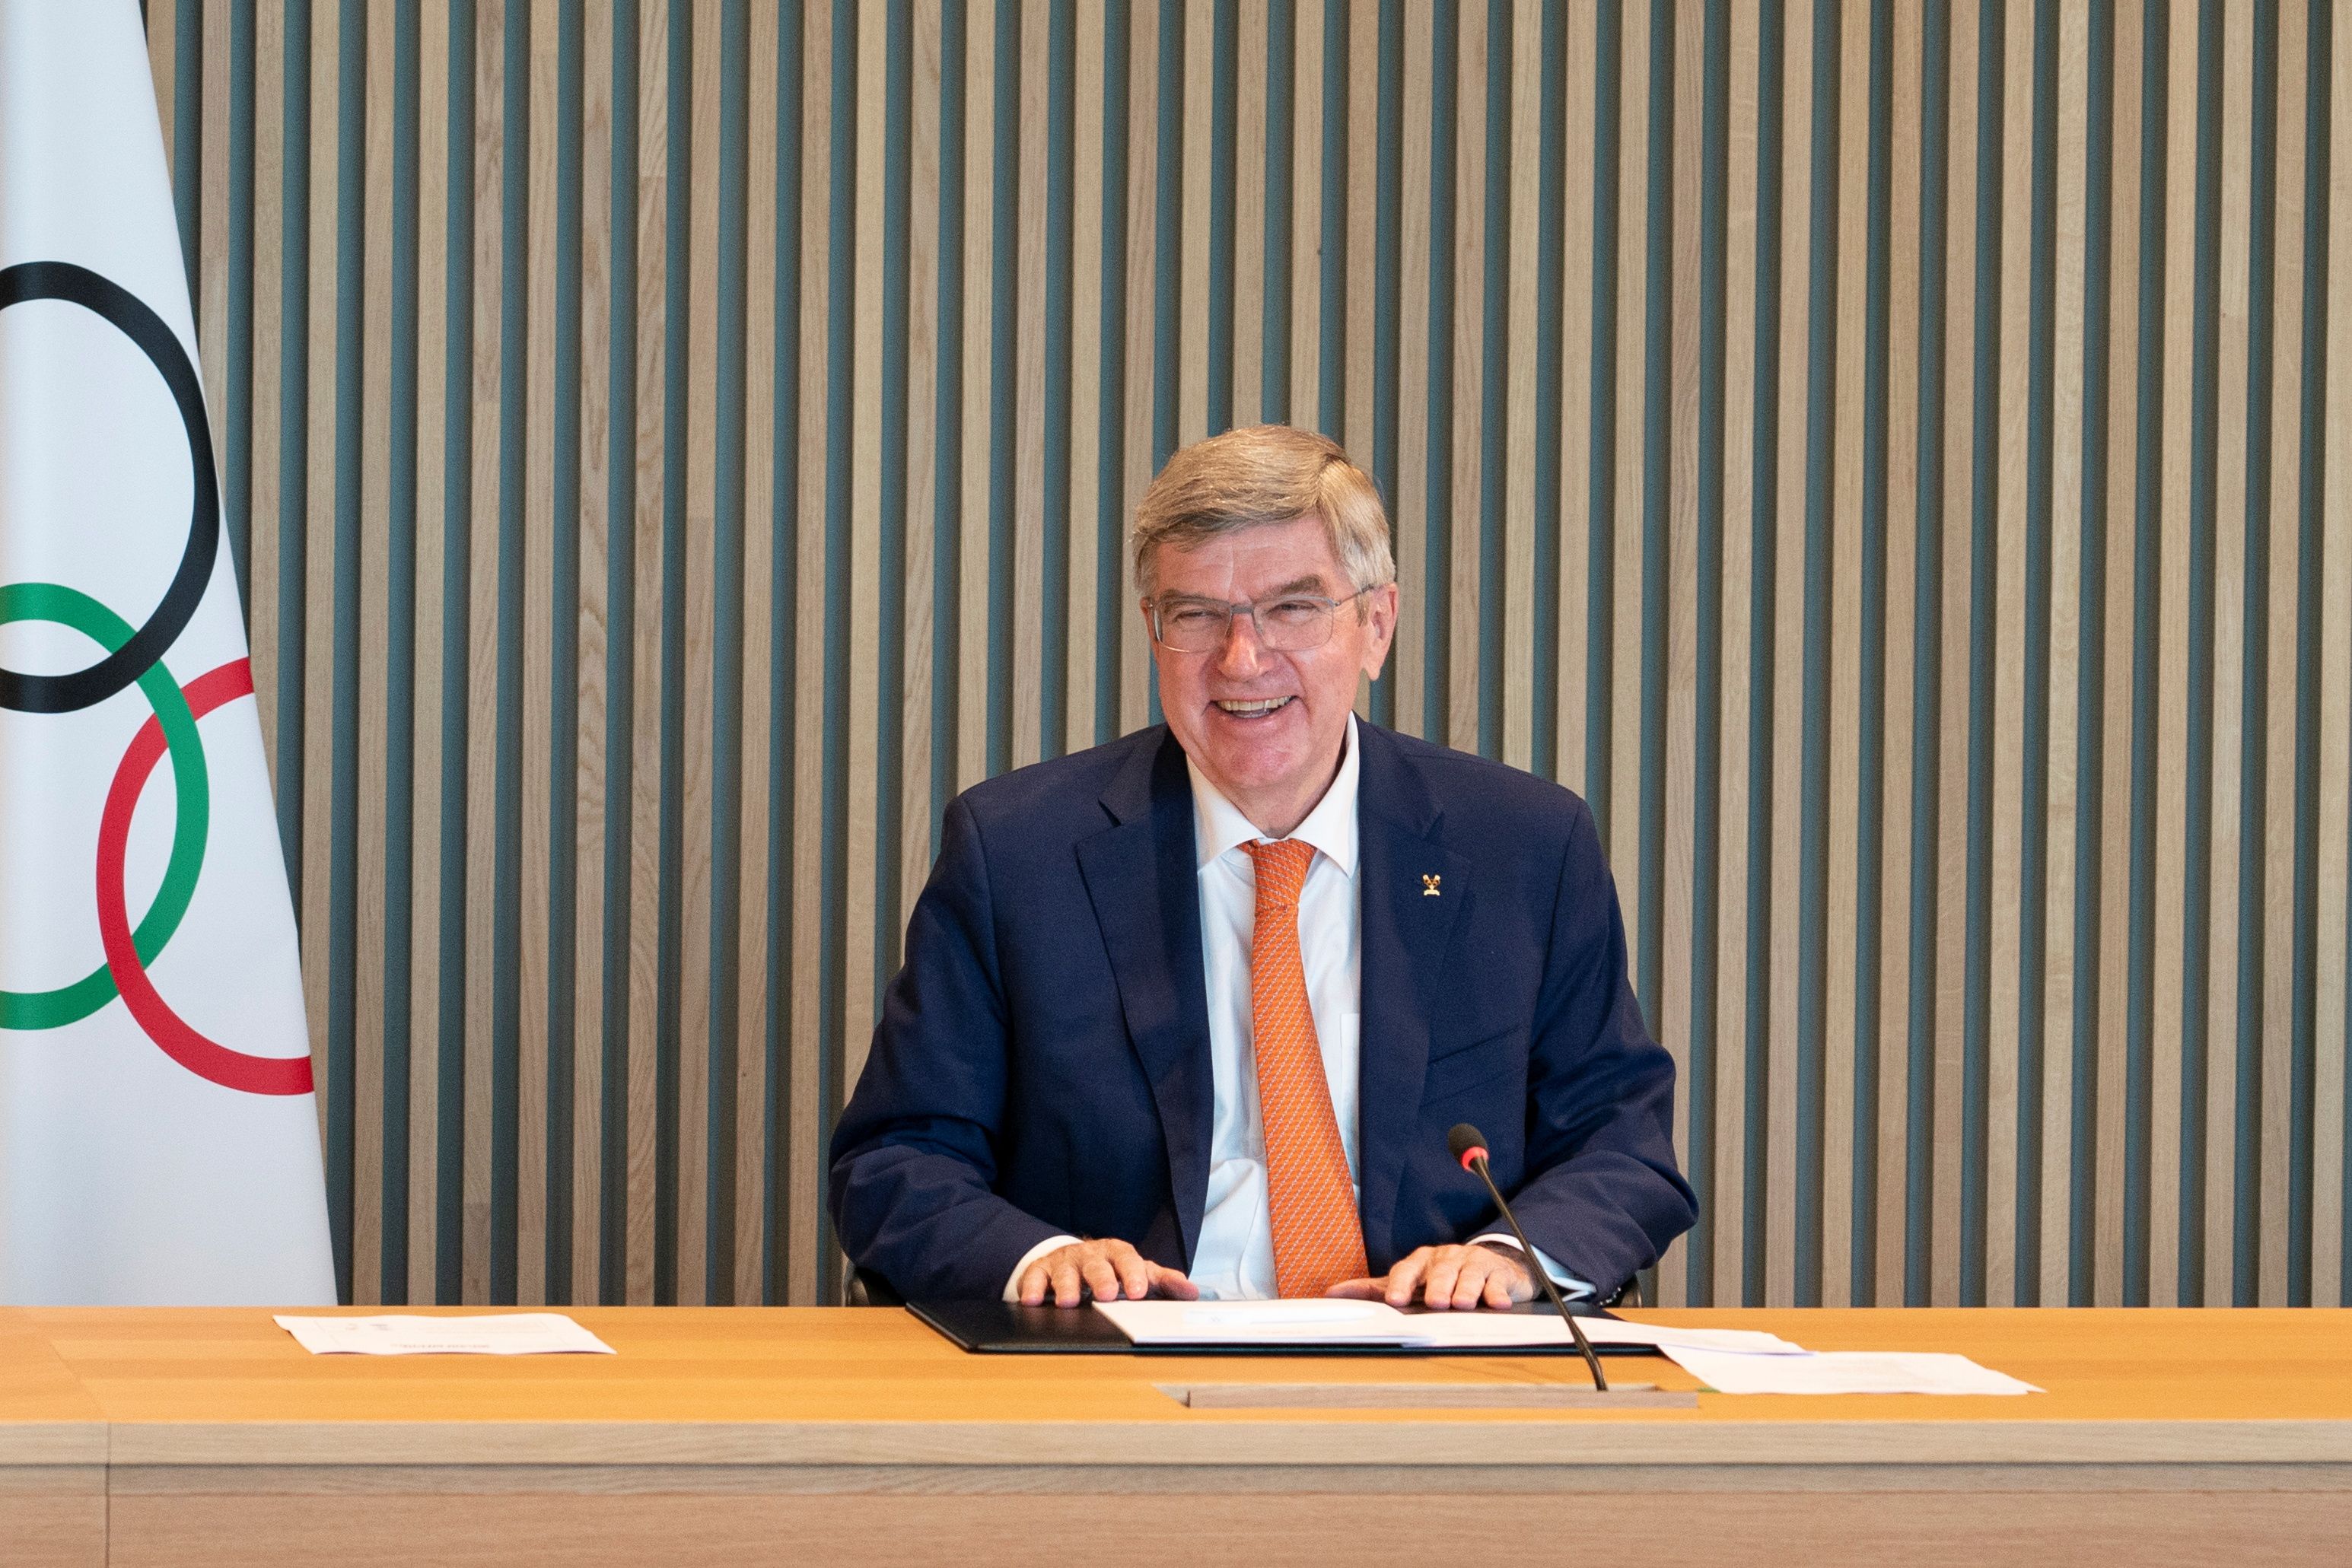 IOC President Bach attends the Executive Board meeting in Lausanne